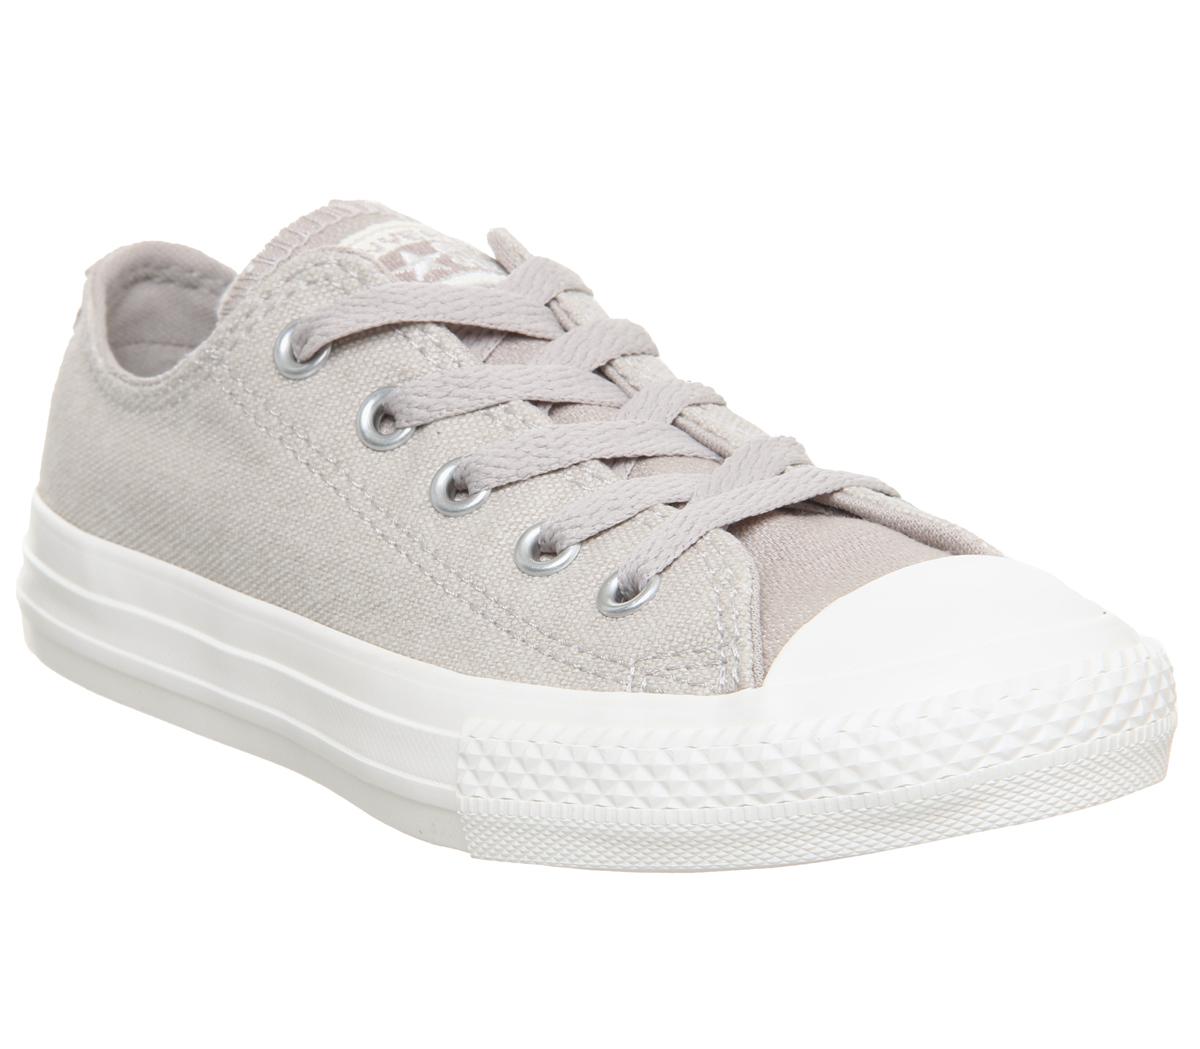 ConverseAll Star Low Youth TrainersPapyrus Egret